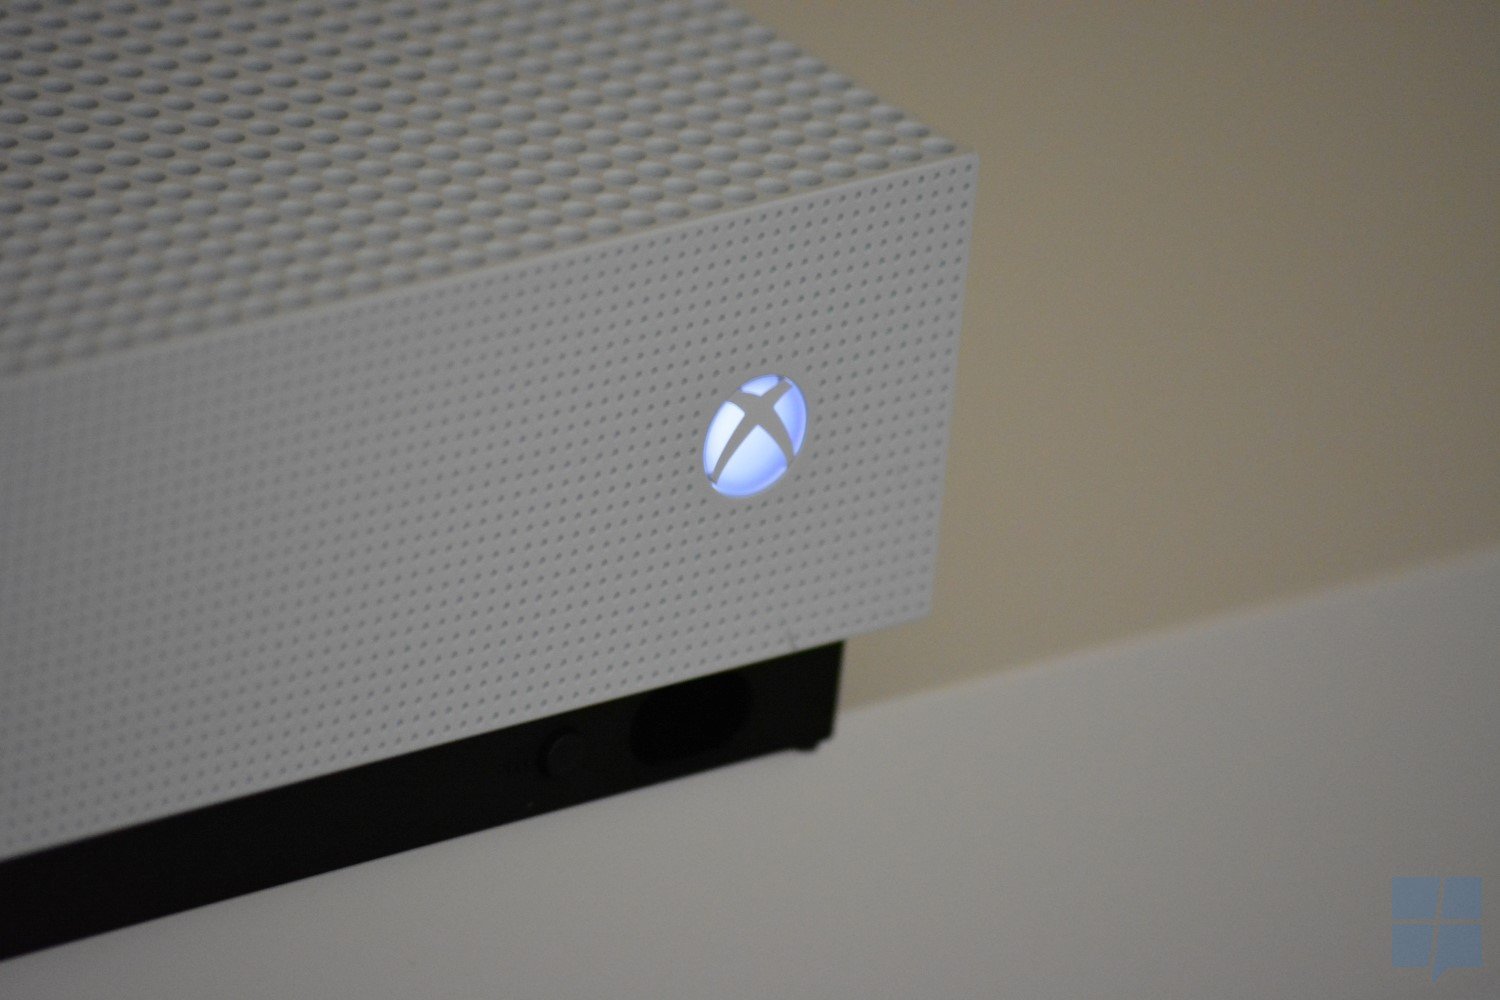 Why is the Xbox One S so aesthetically pleasing?